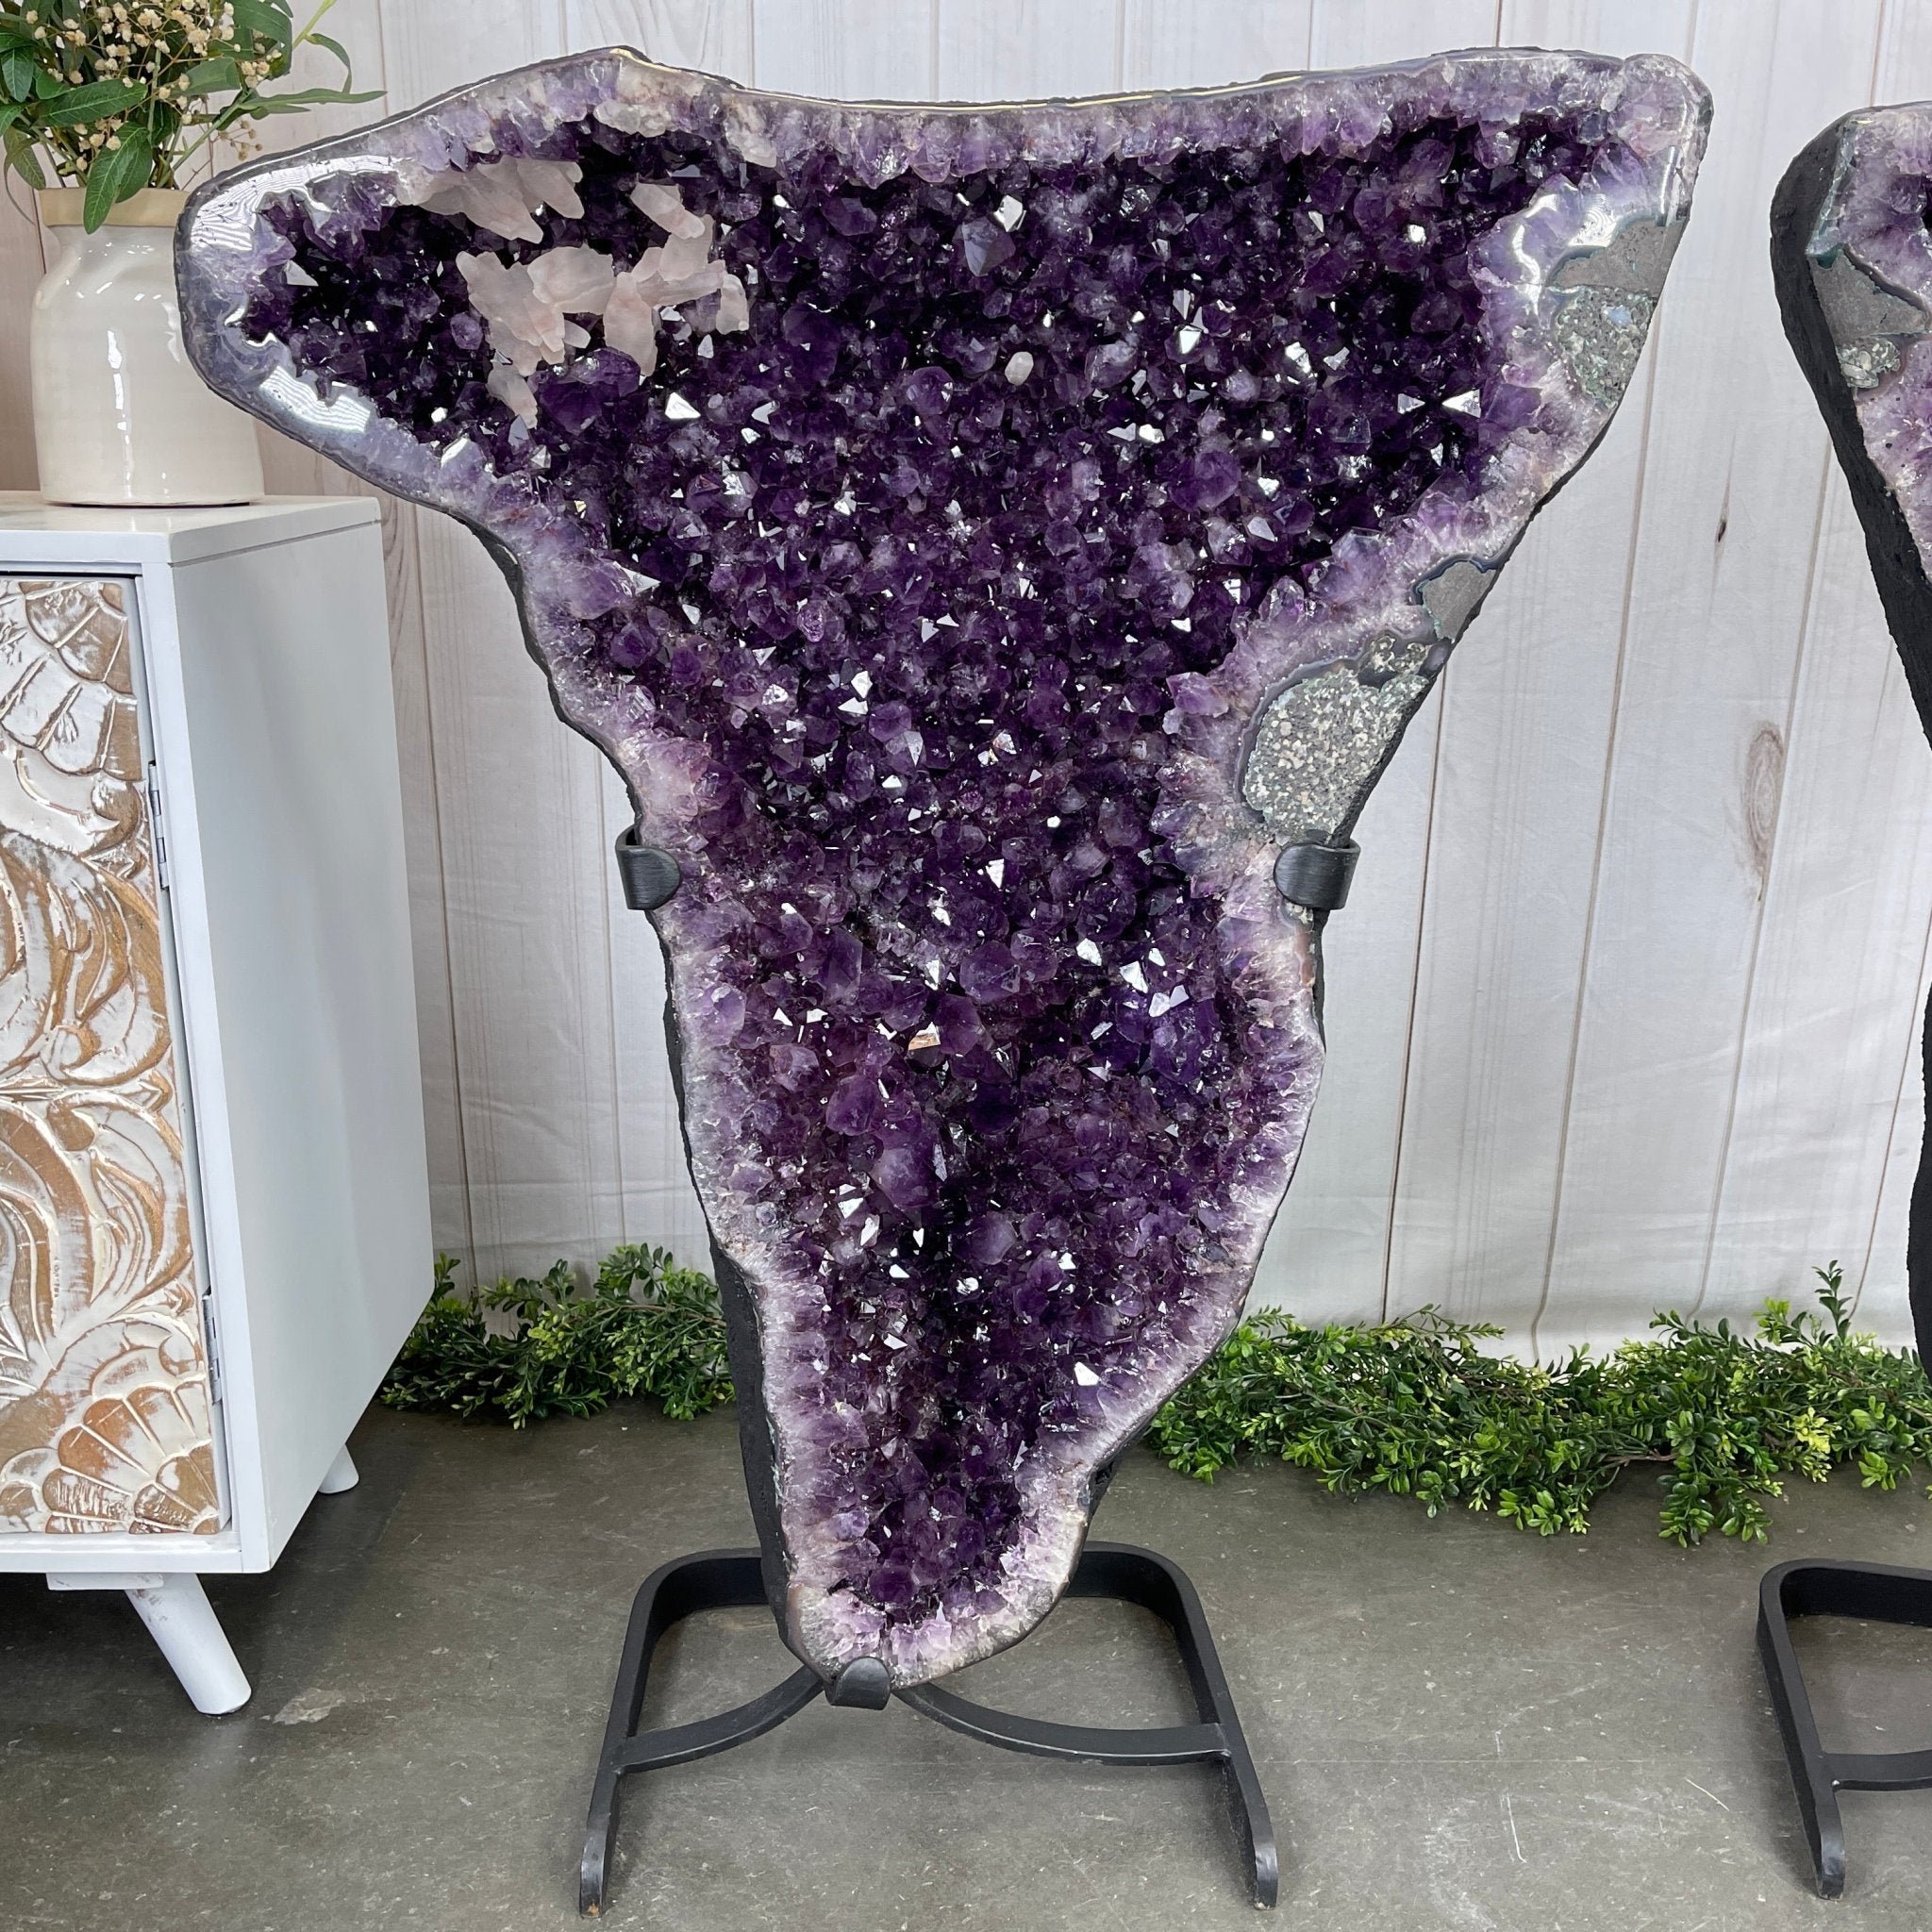 Large Extra Plus Quality Amethyst Clusters on Metal Stand, 37.4" tall #5491 by Brazil Gems - Brazil GemsBrazil GemsLarge Extra Plus Quality Amethyst Clusters on Metal Stand, 37.4" tall #5491 by Brazil GemsClusters on Fixed Bases5491-0035